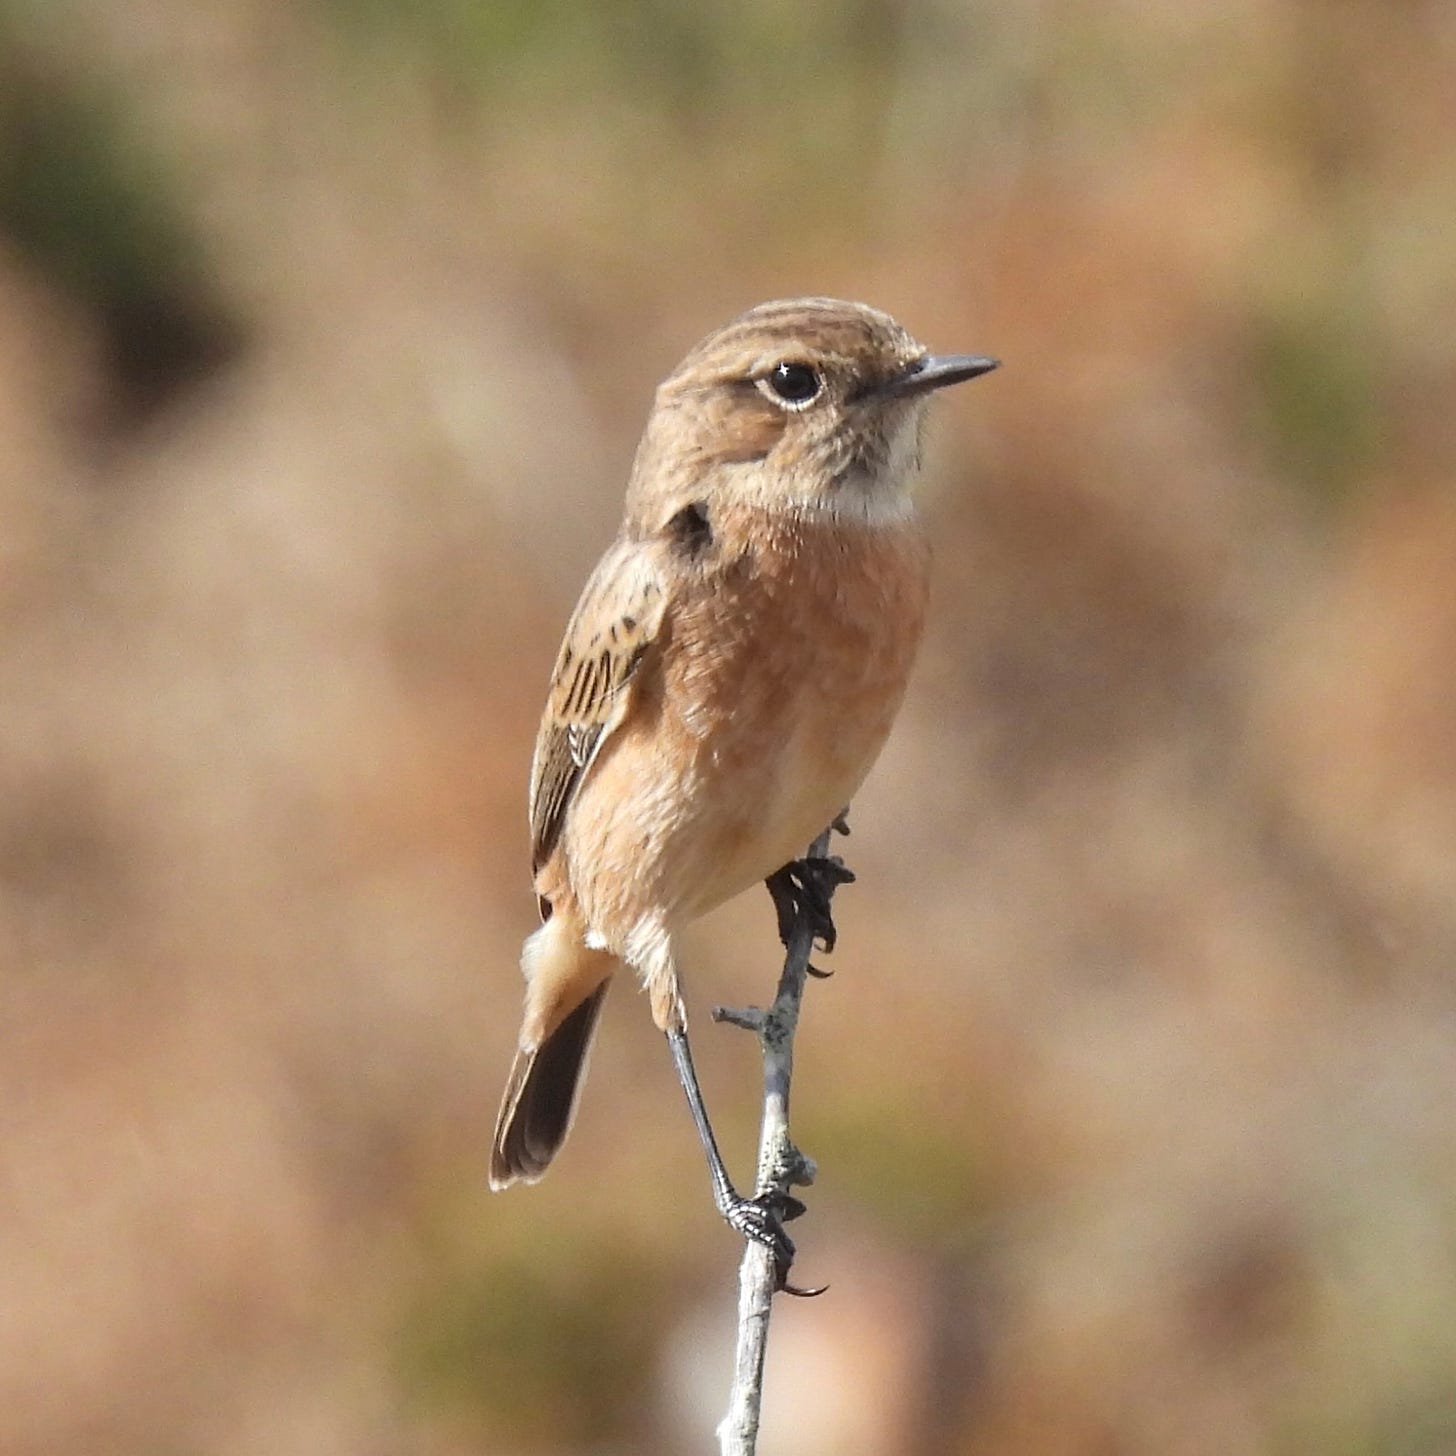 A Stonechat perching on a vertical twig, its feet grasping at the sides of the twig. The bird has a peachy-coloured breast and mid-brown head and back. The background is blurred foliage in autumn colours.